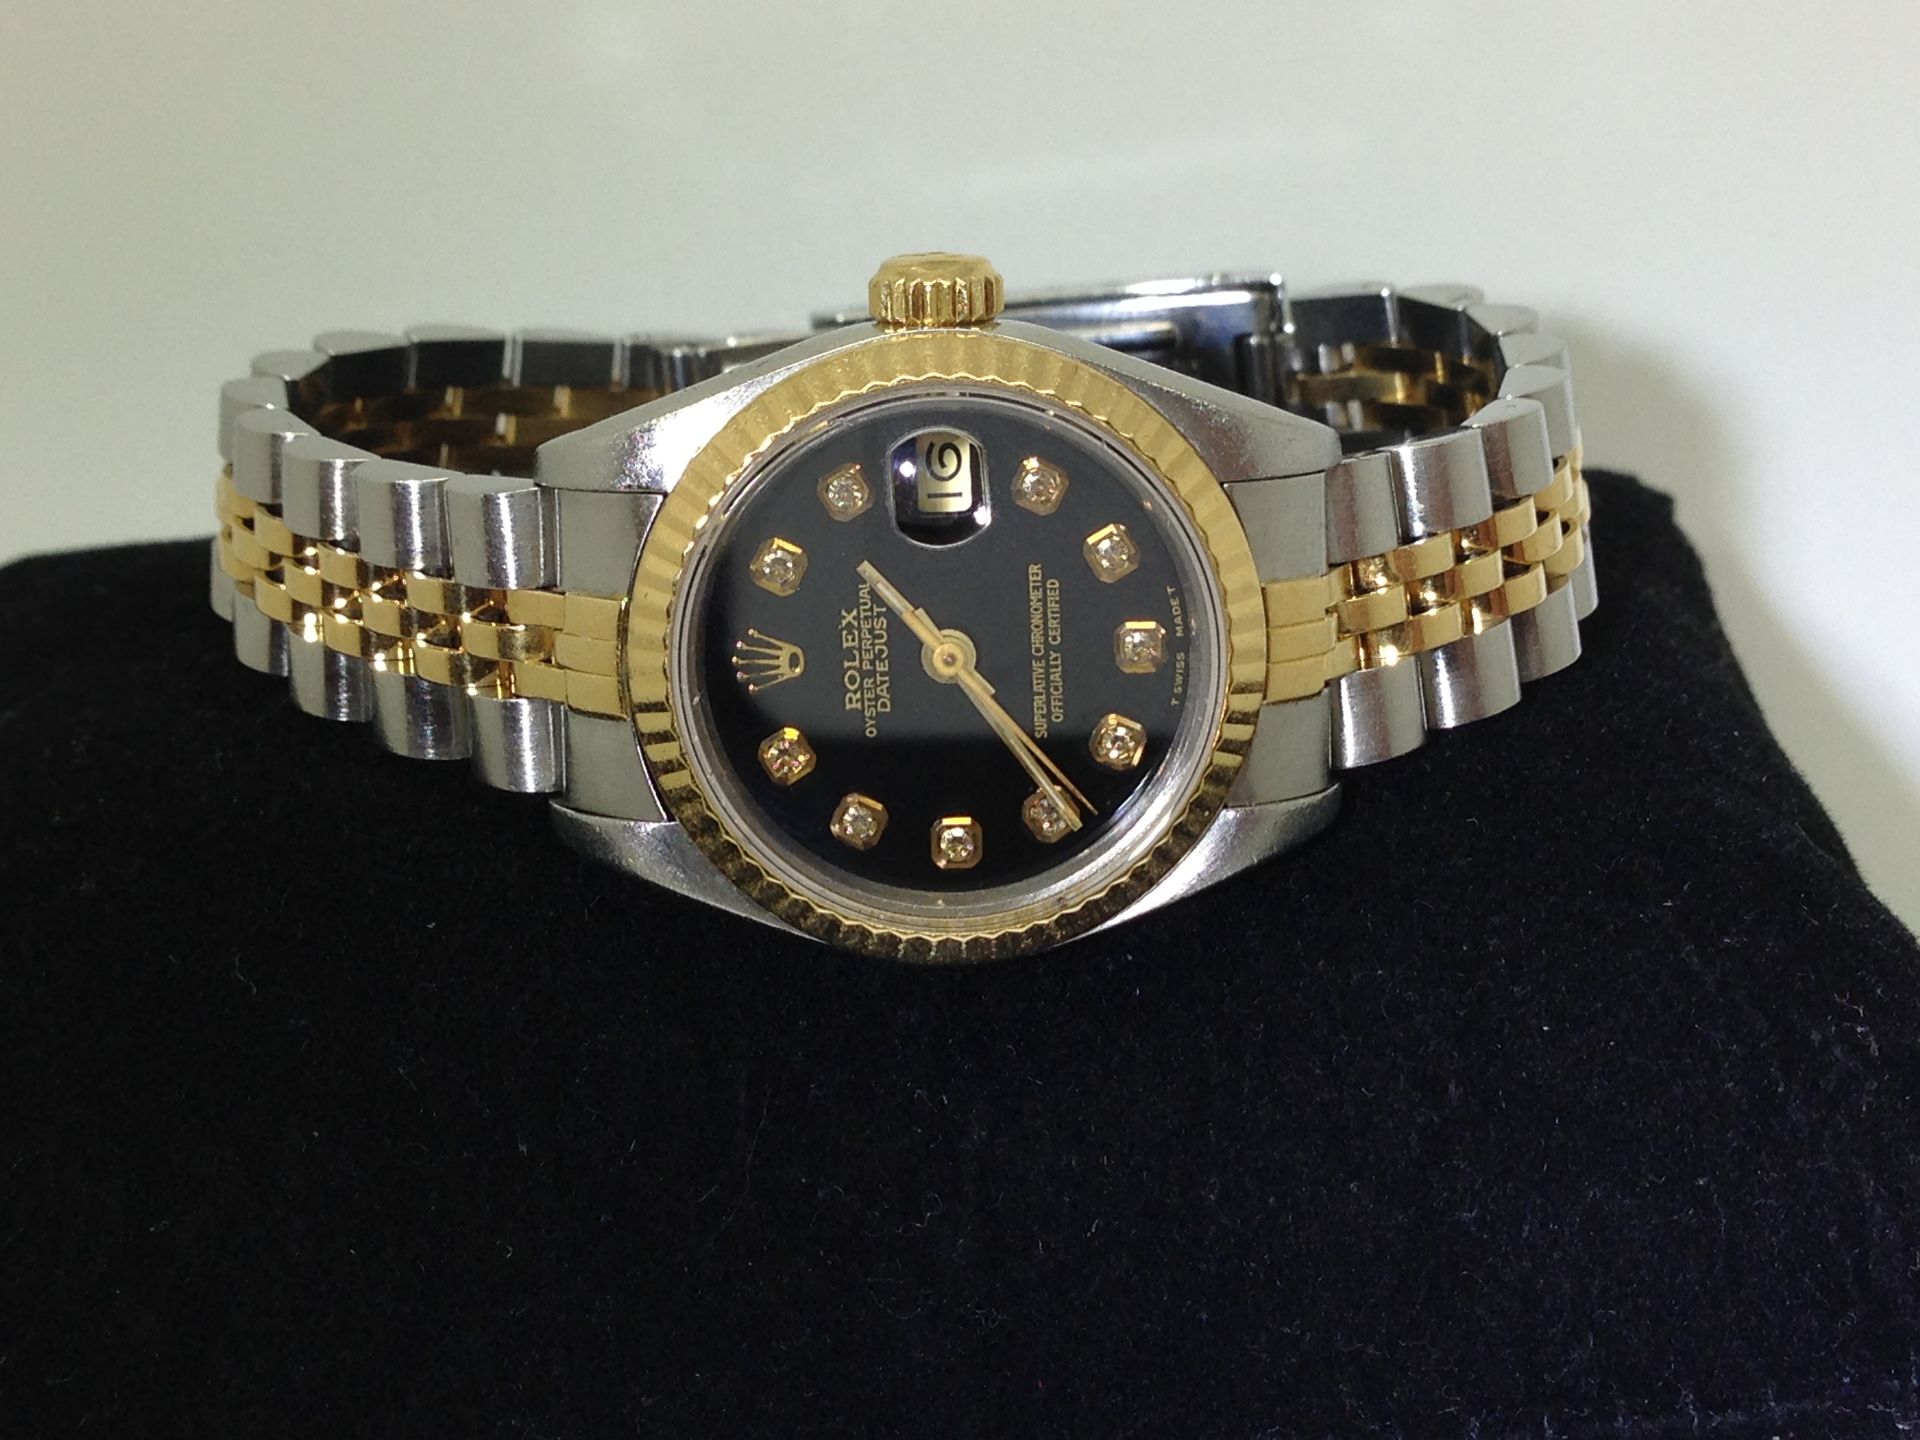 ROLEX DATEJUST 18ct GOLD & STAINLESS STEEL DIAMOND SET WATCH - Image 3 of 3